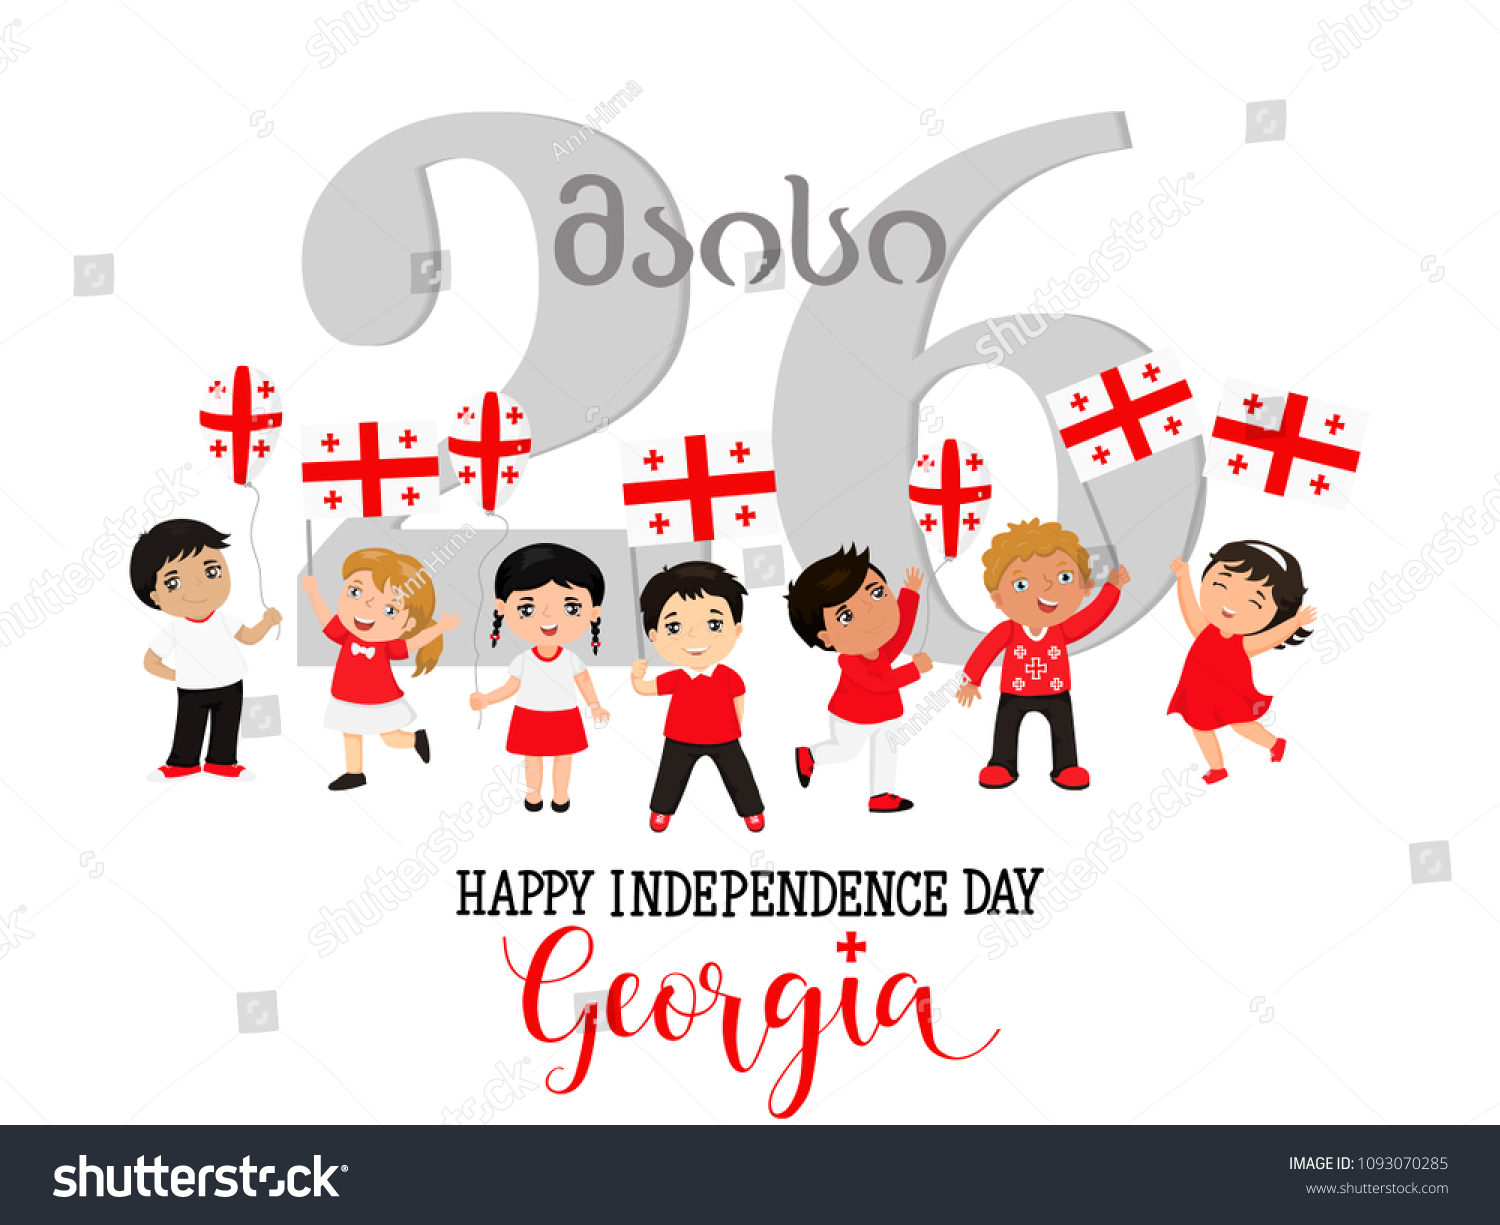 SVG of Georgia Independence Day 26th of May. design template greeting card, banner. Happy children with flags and balloons. Georgian: May 26 svg